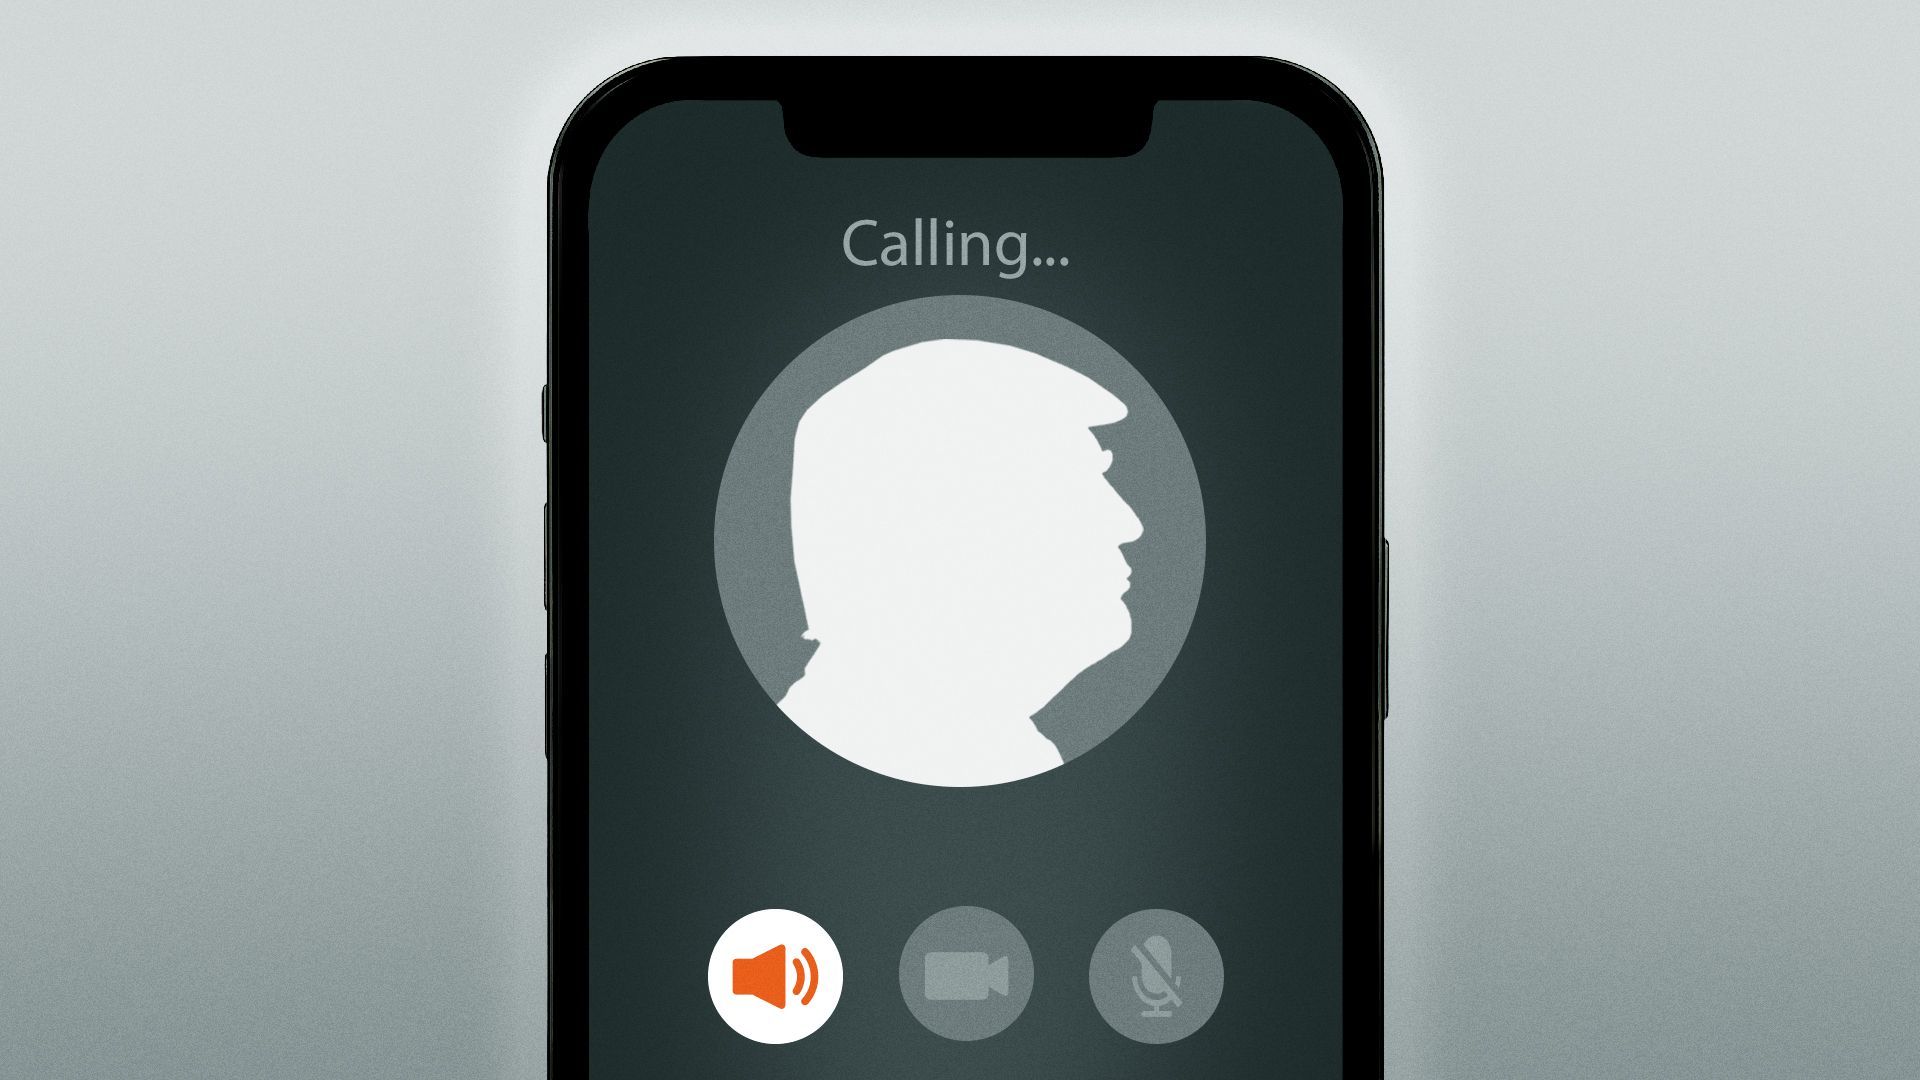 Illustration of a smartphone screen with Donald Trump's silhouette as an avatar, the word 